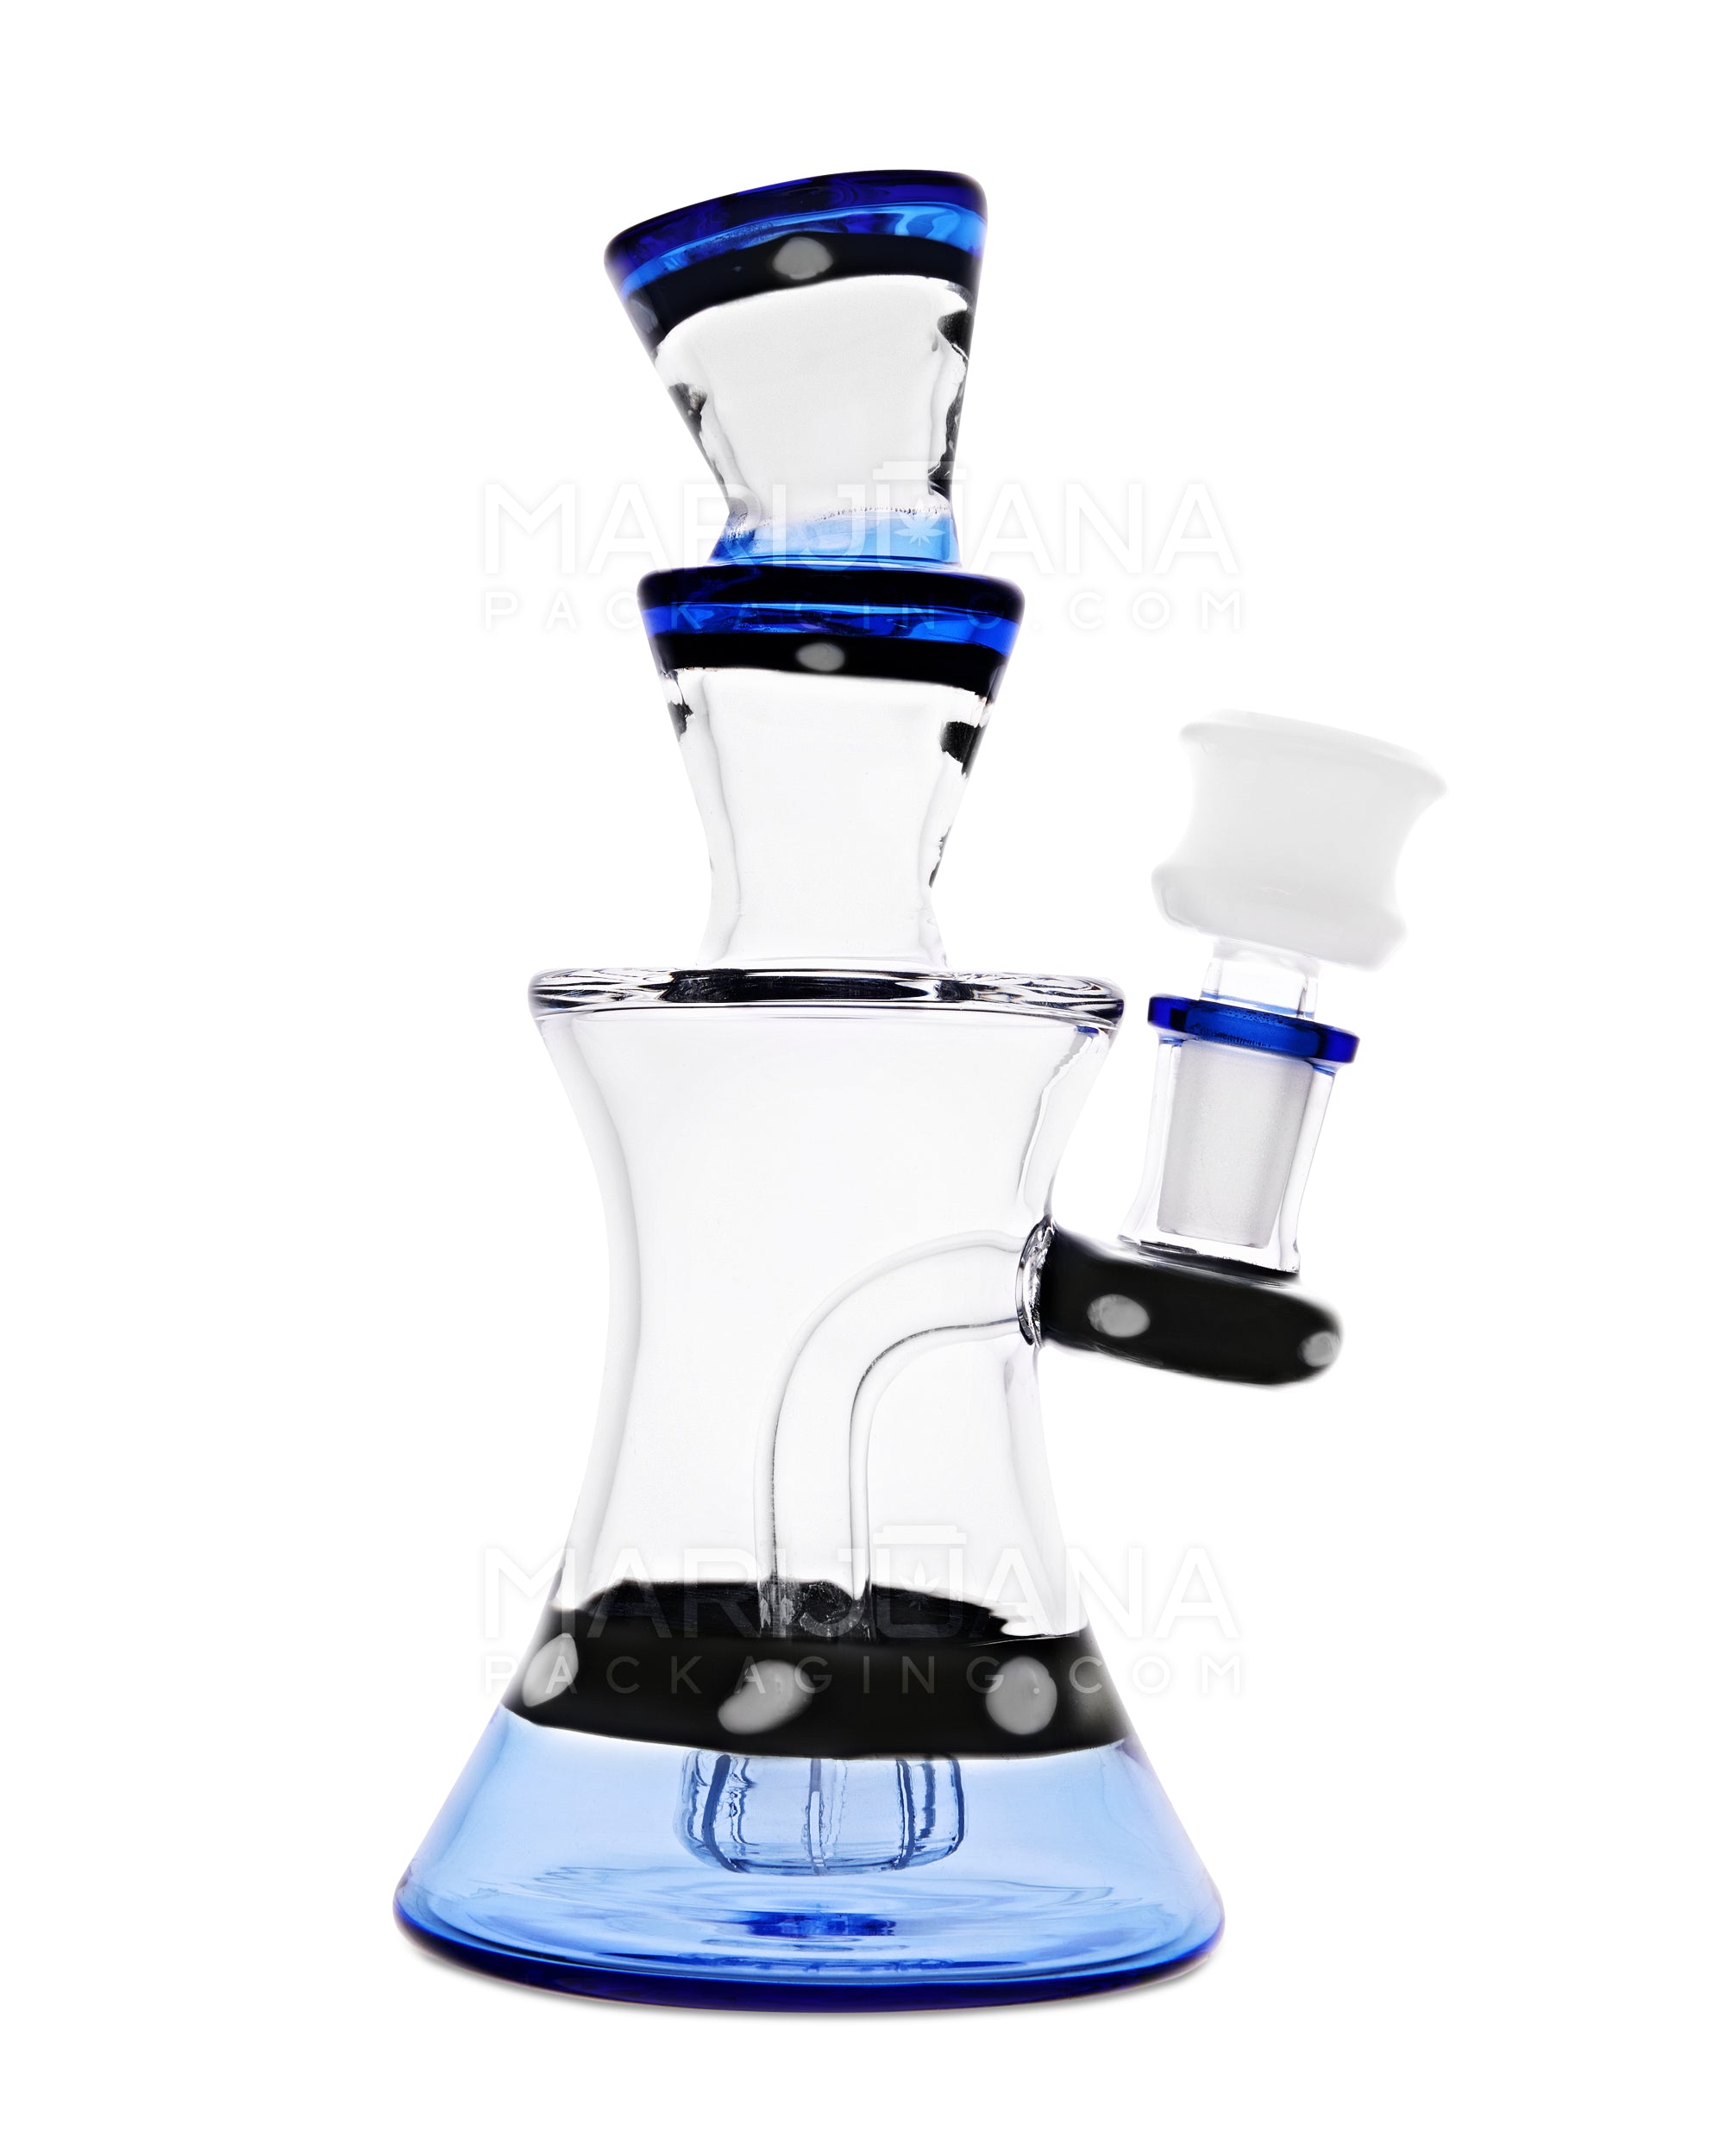 The Best Bongs Under $50 You Can Find Online in Bulk